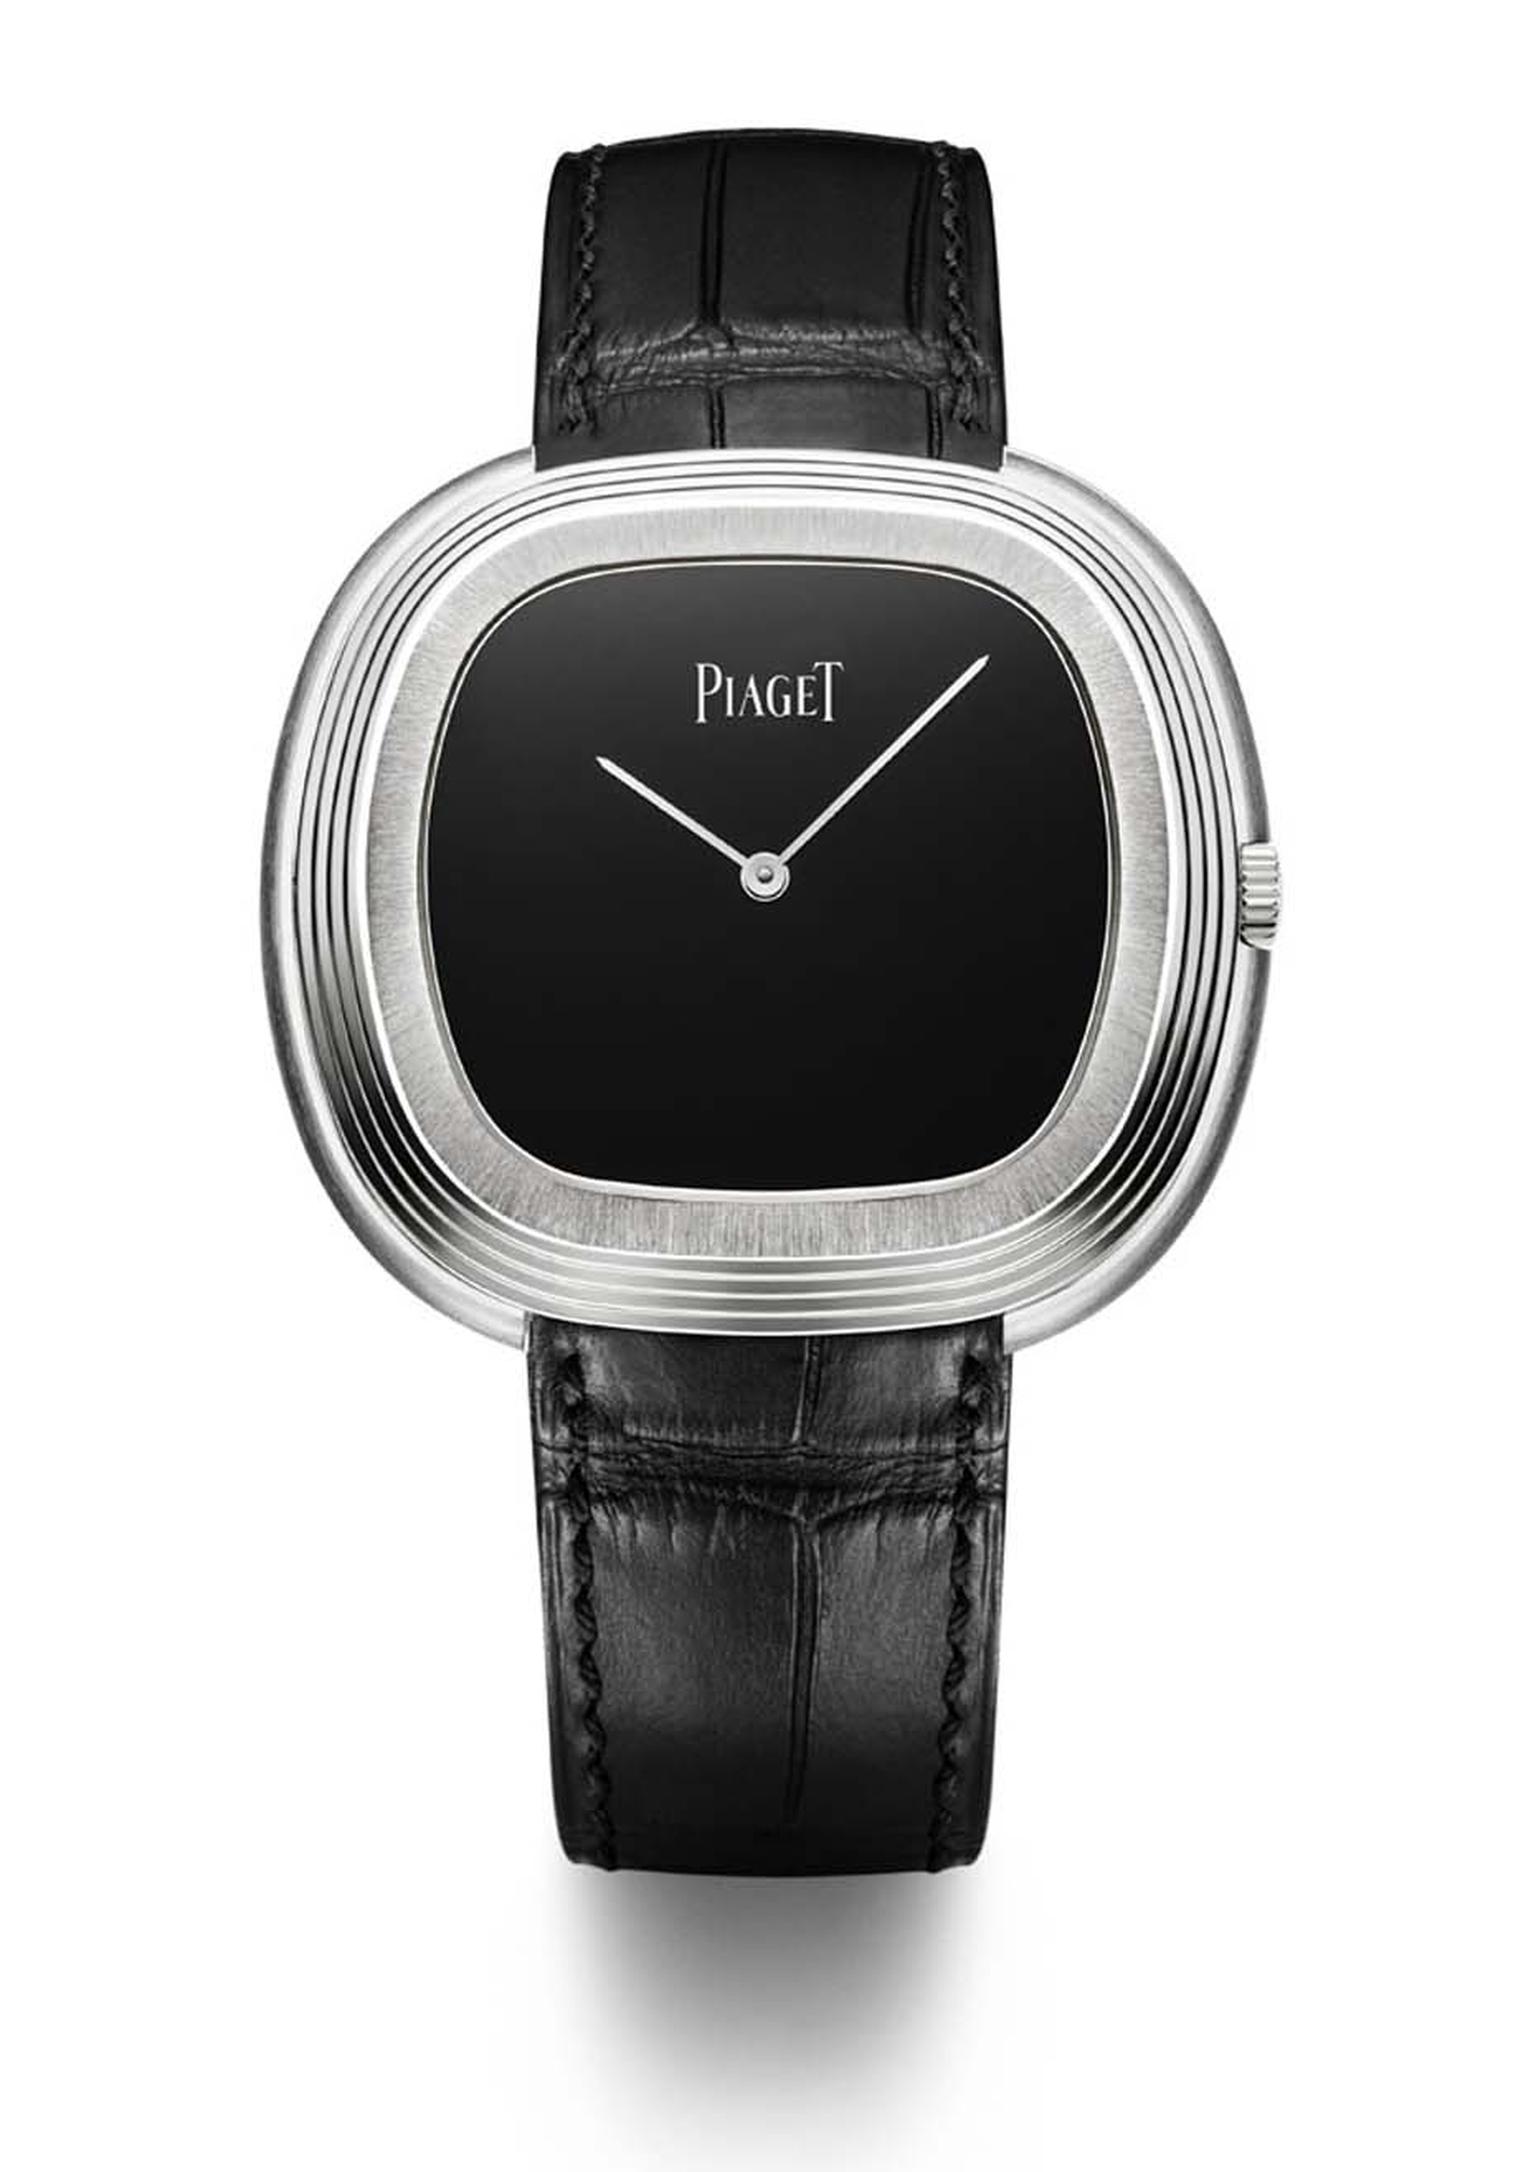 The Piaget Black Tie vintage watch has retained the bold cushion-shaped case of its predecessor, a watch that was purportedly worn and admired by Andy Warhol in the 1960s.